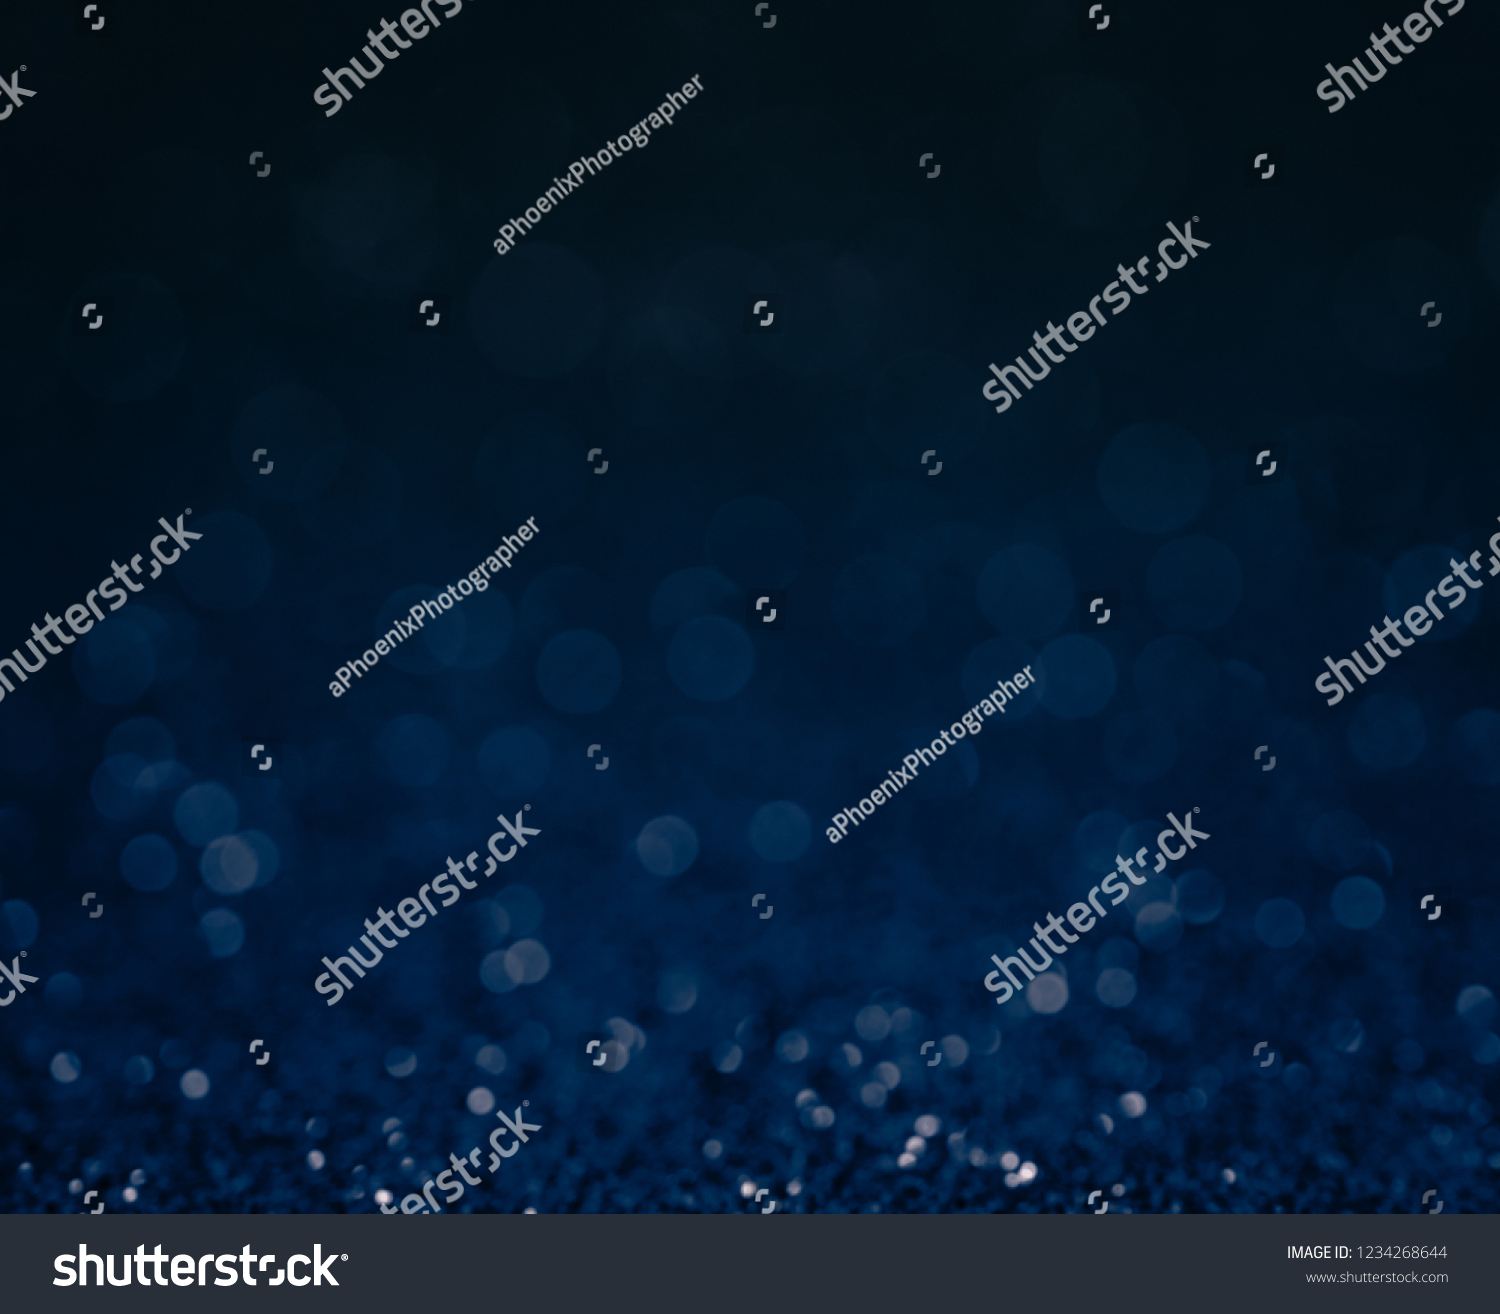 Blue background for christmas navy glitter sparkle. Abstract bokeh light shiny dark holiday. #1234268644